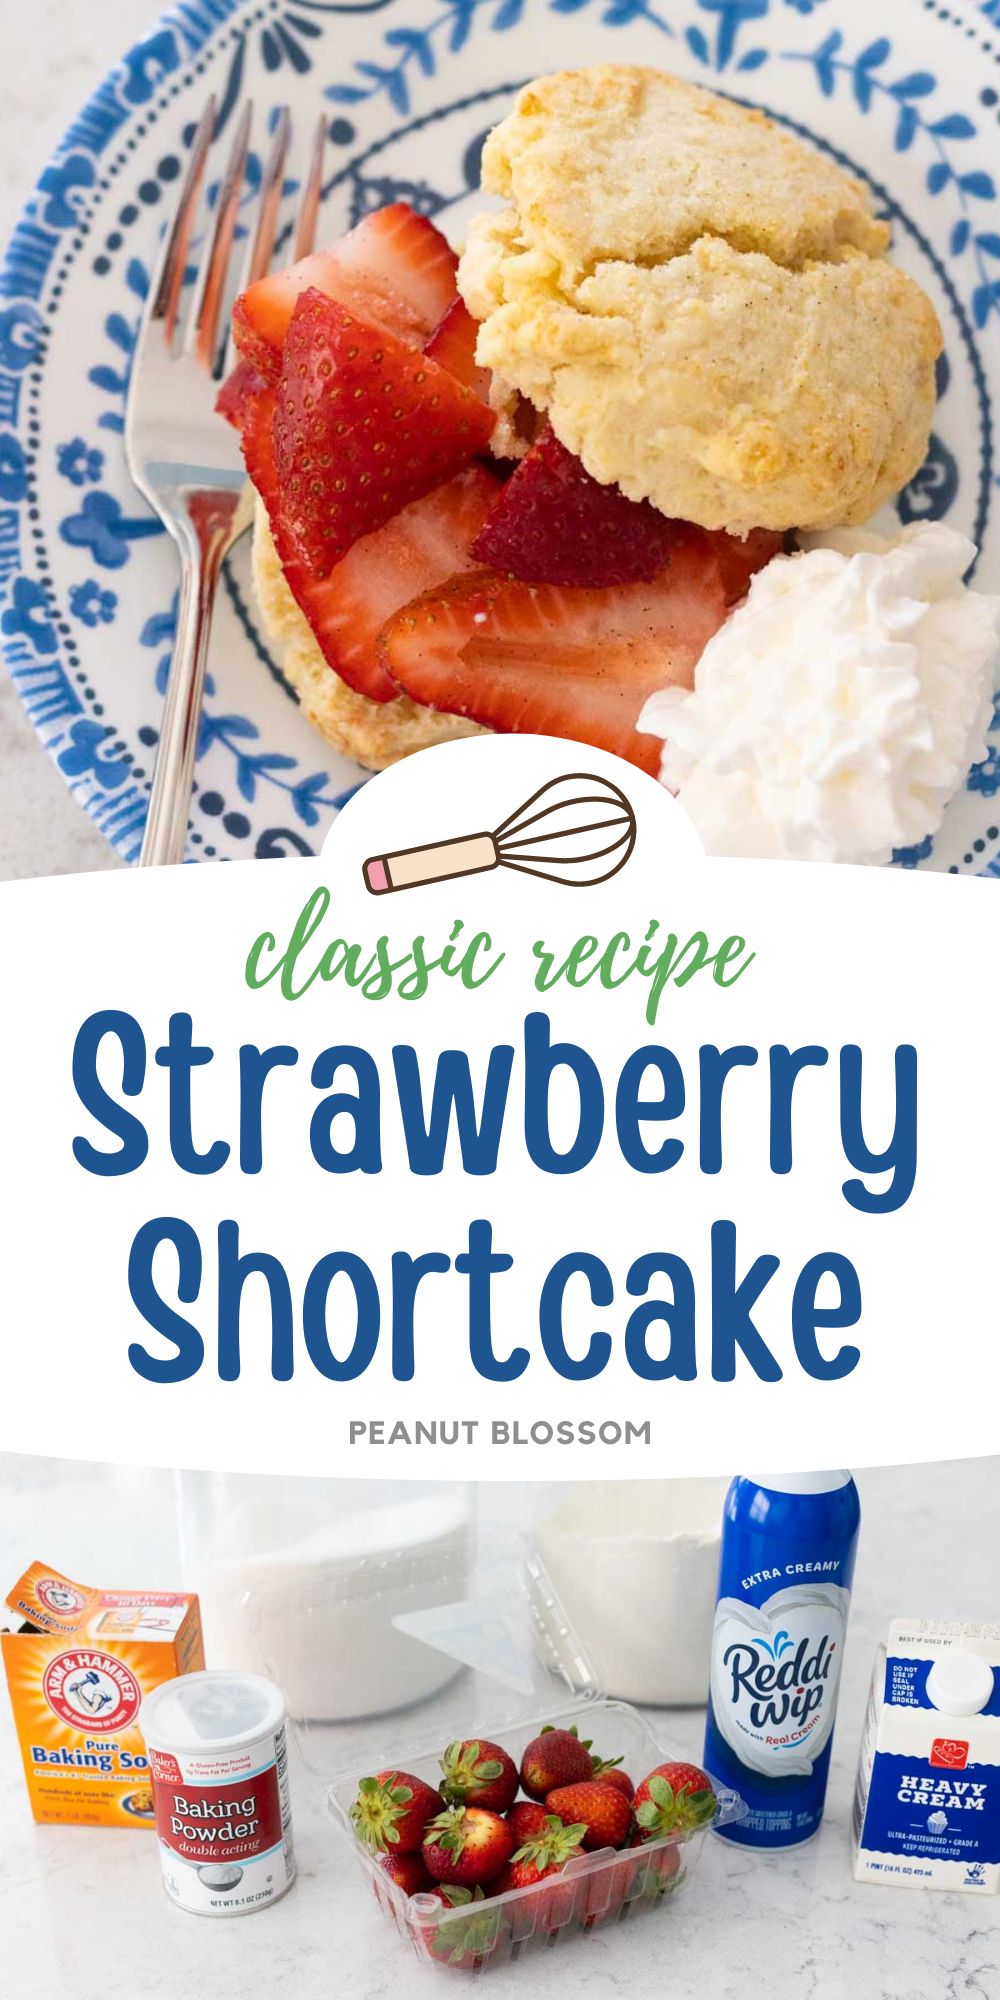 An assembled strawberry shortcake on top, the ingredients to make it are featured below.